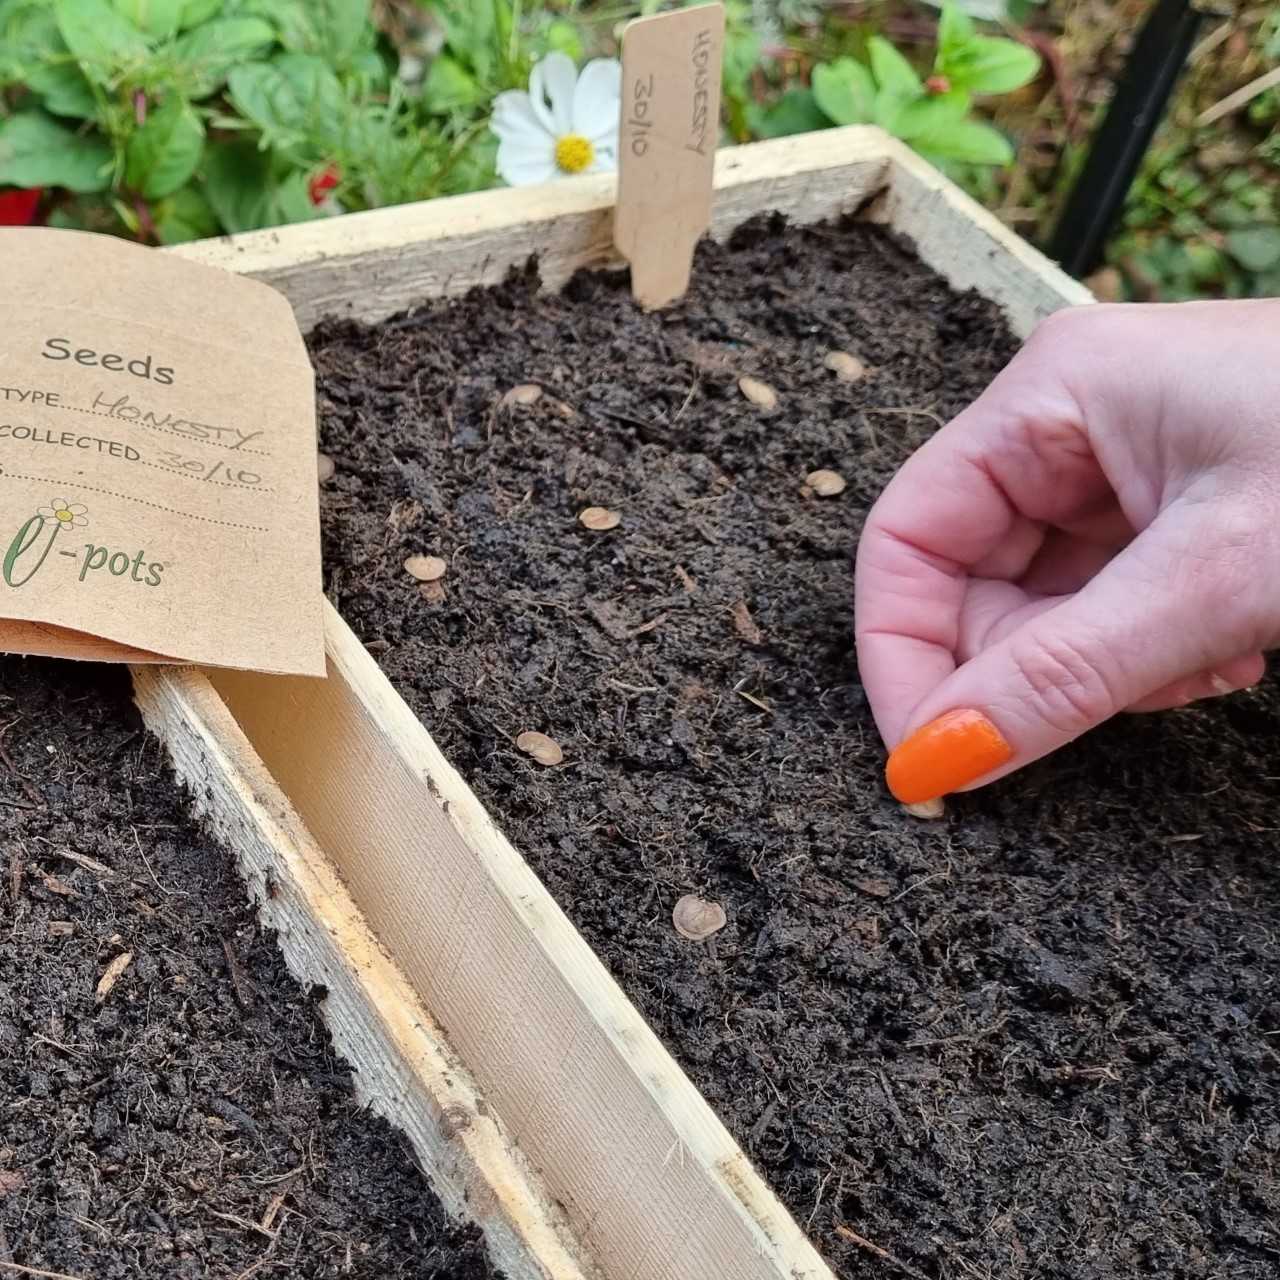 Wood seed tray sowing seeds